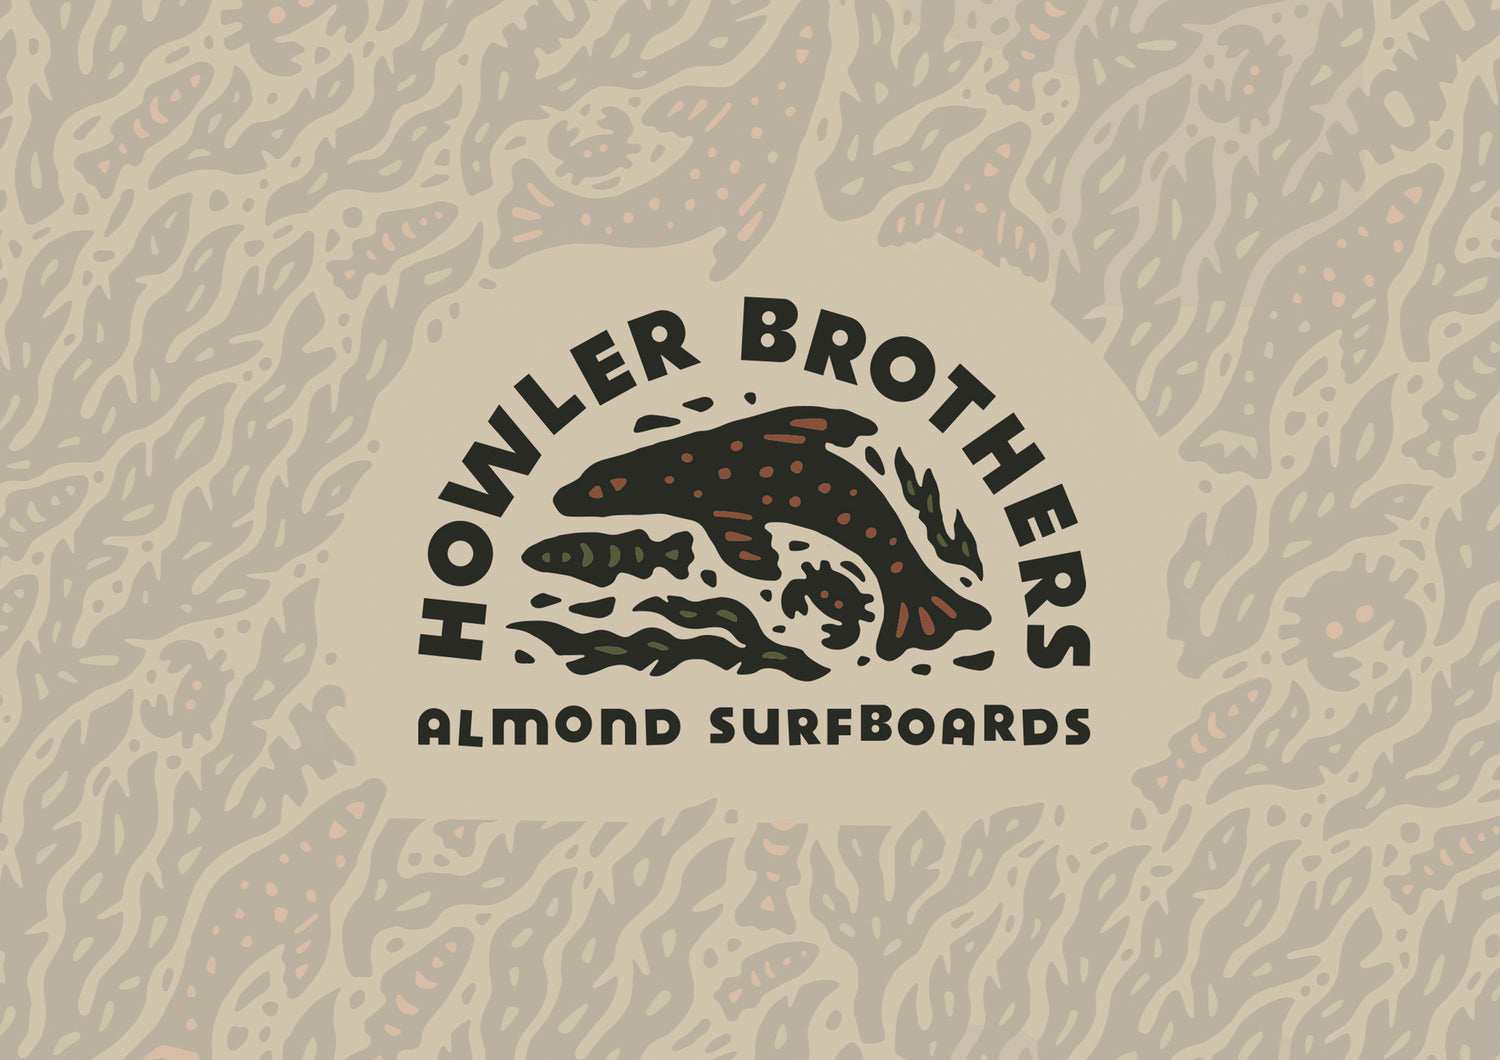 Howler Brothers x Almond Surfboards Collaboration Event